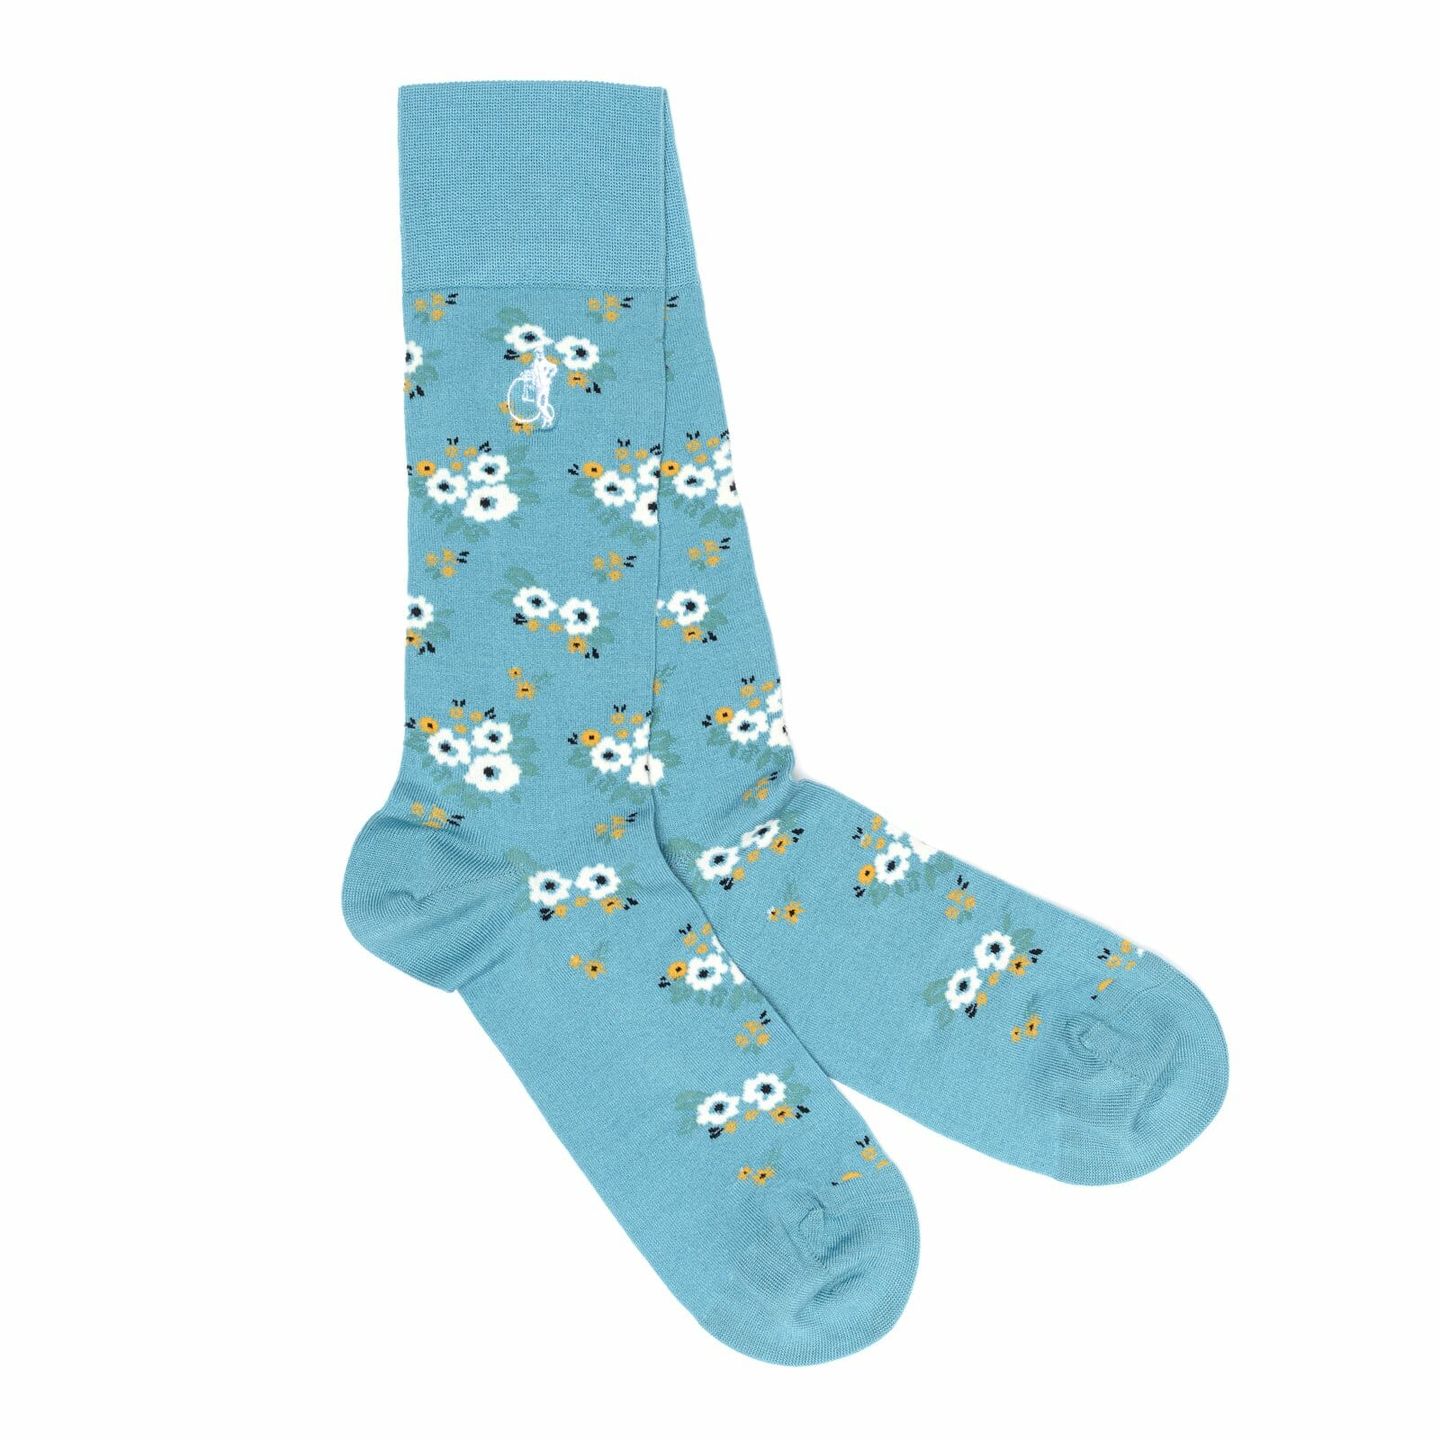 A pair of light blue socks with a flower design on them